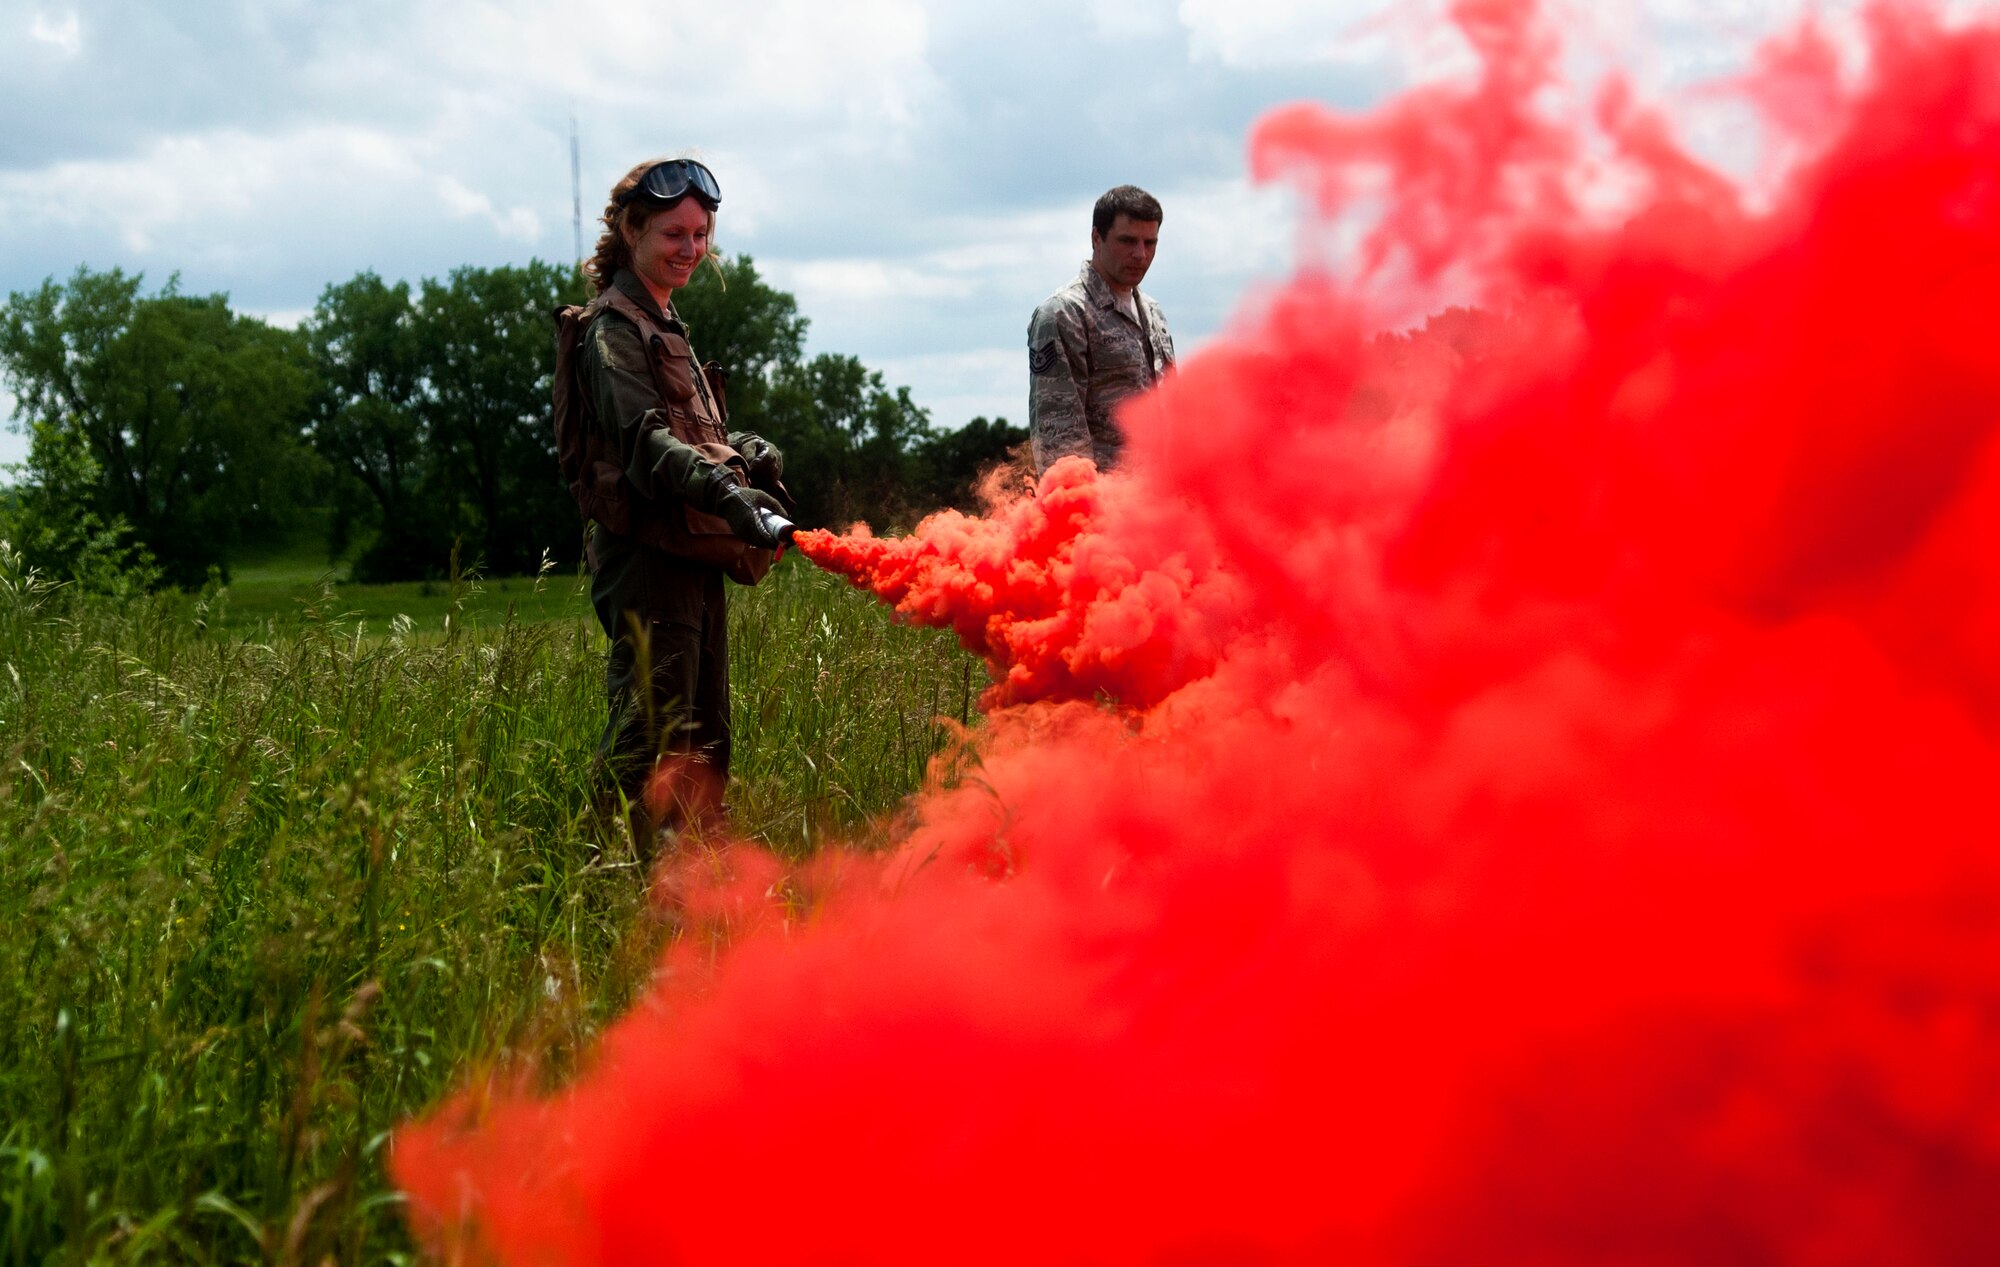 An Airman from the 133rd Airlift Wing ignites a smoke flair used to signal the Black Hawk helicopter for combat and water survival training in Arden Hills, Minn., Jun. 18, 2013. 
(U.S. Air National Guard photo by Staff Sgt. Austen Adriaens/Released)
